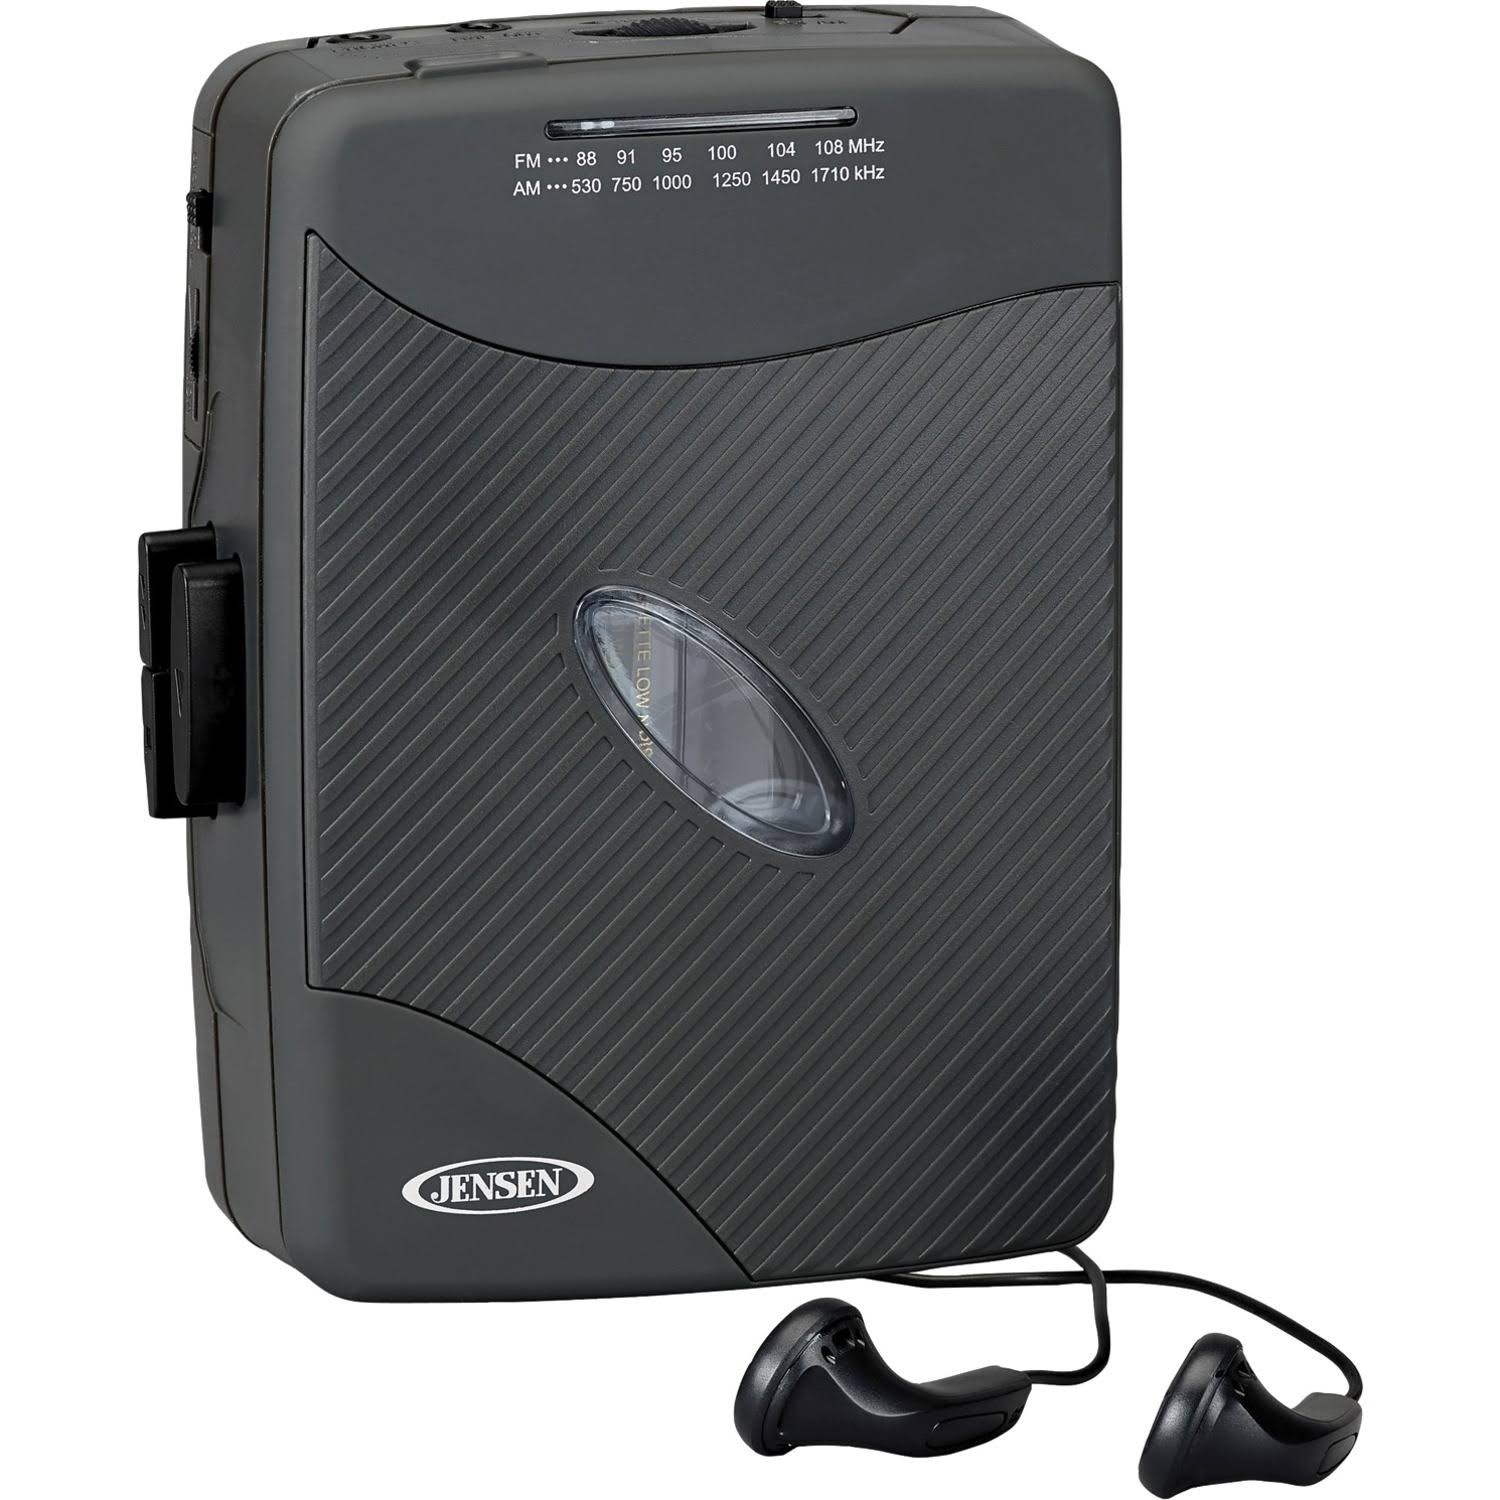 Jensen SCR-75 Personal Stereo Cassette Player - AM/FM - Stereo Earbuds (Black) [